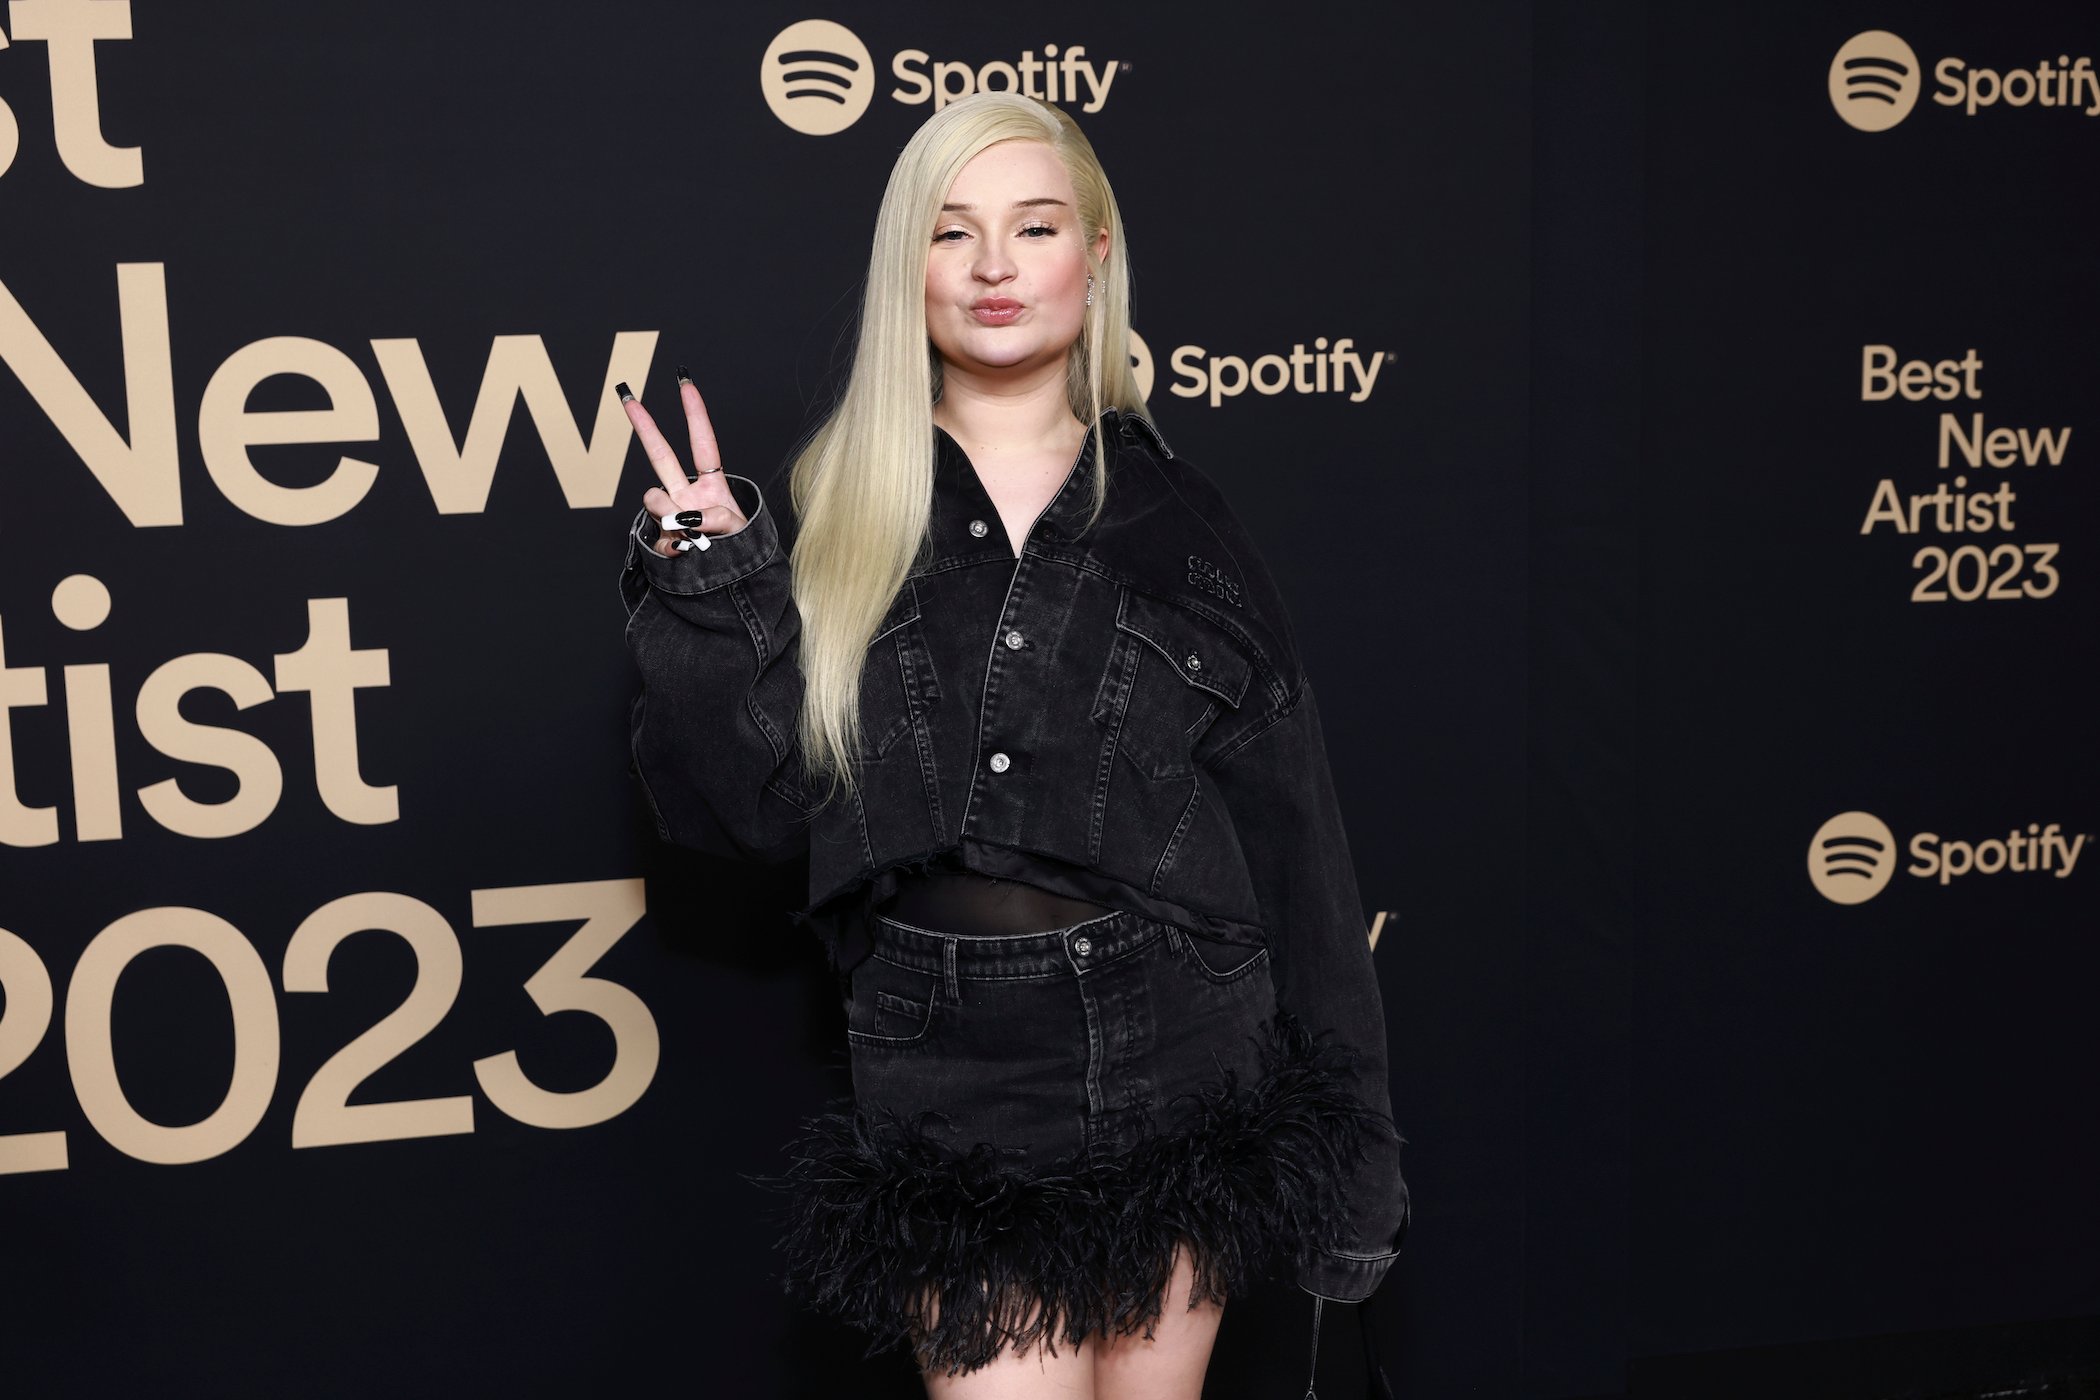 Kim Petras attends Spotify's 2023 Best New Artist Party at Pacific Design Center